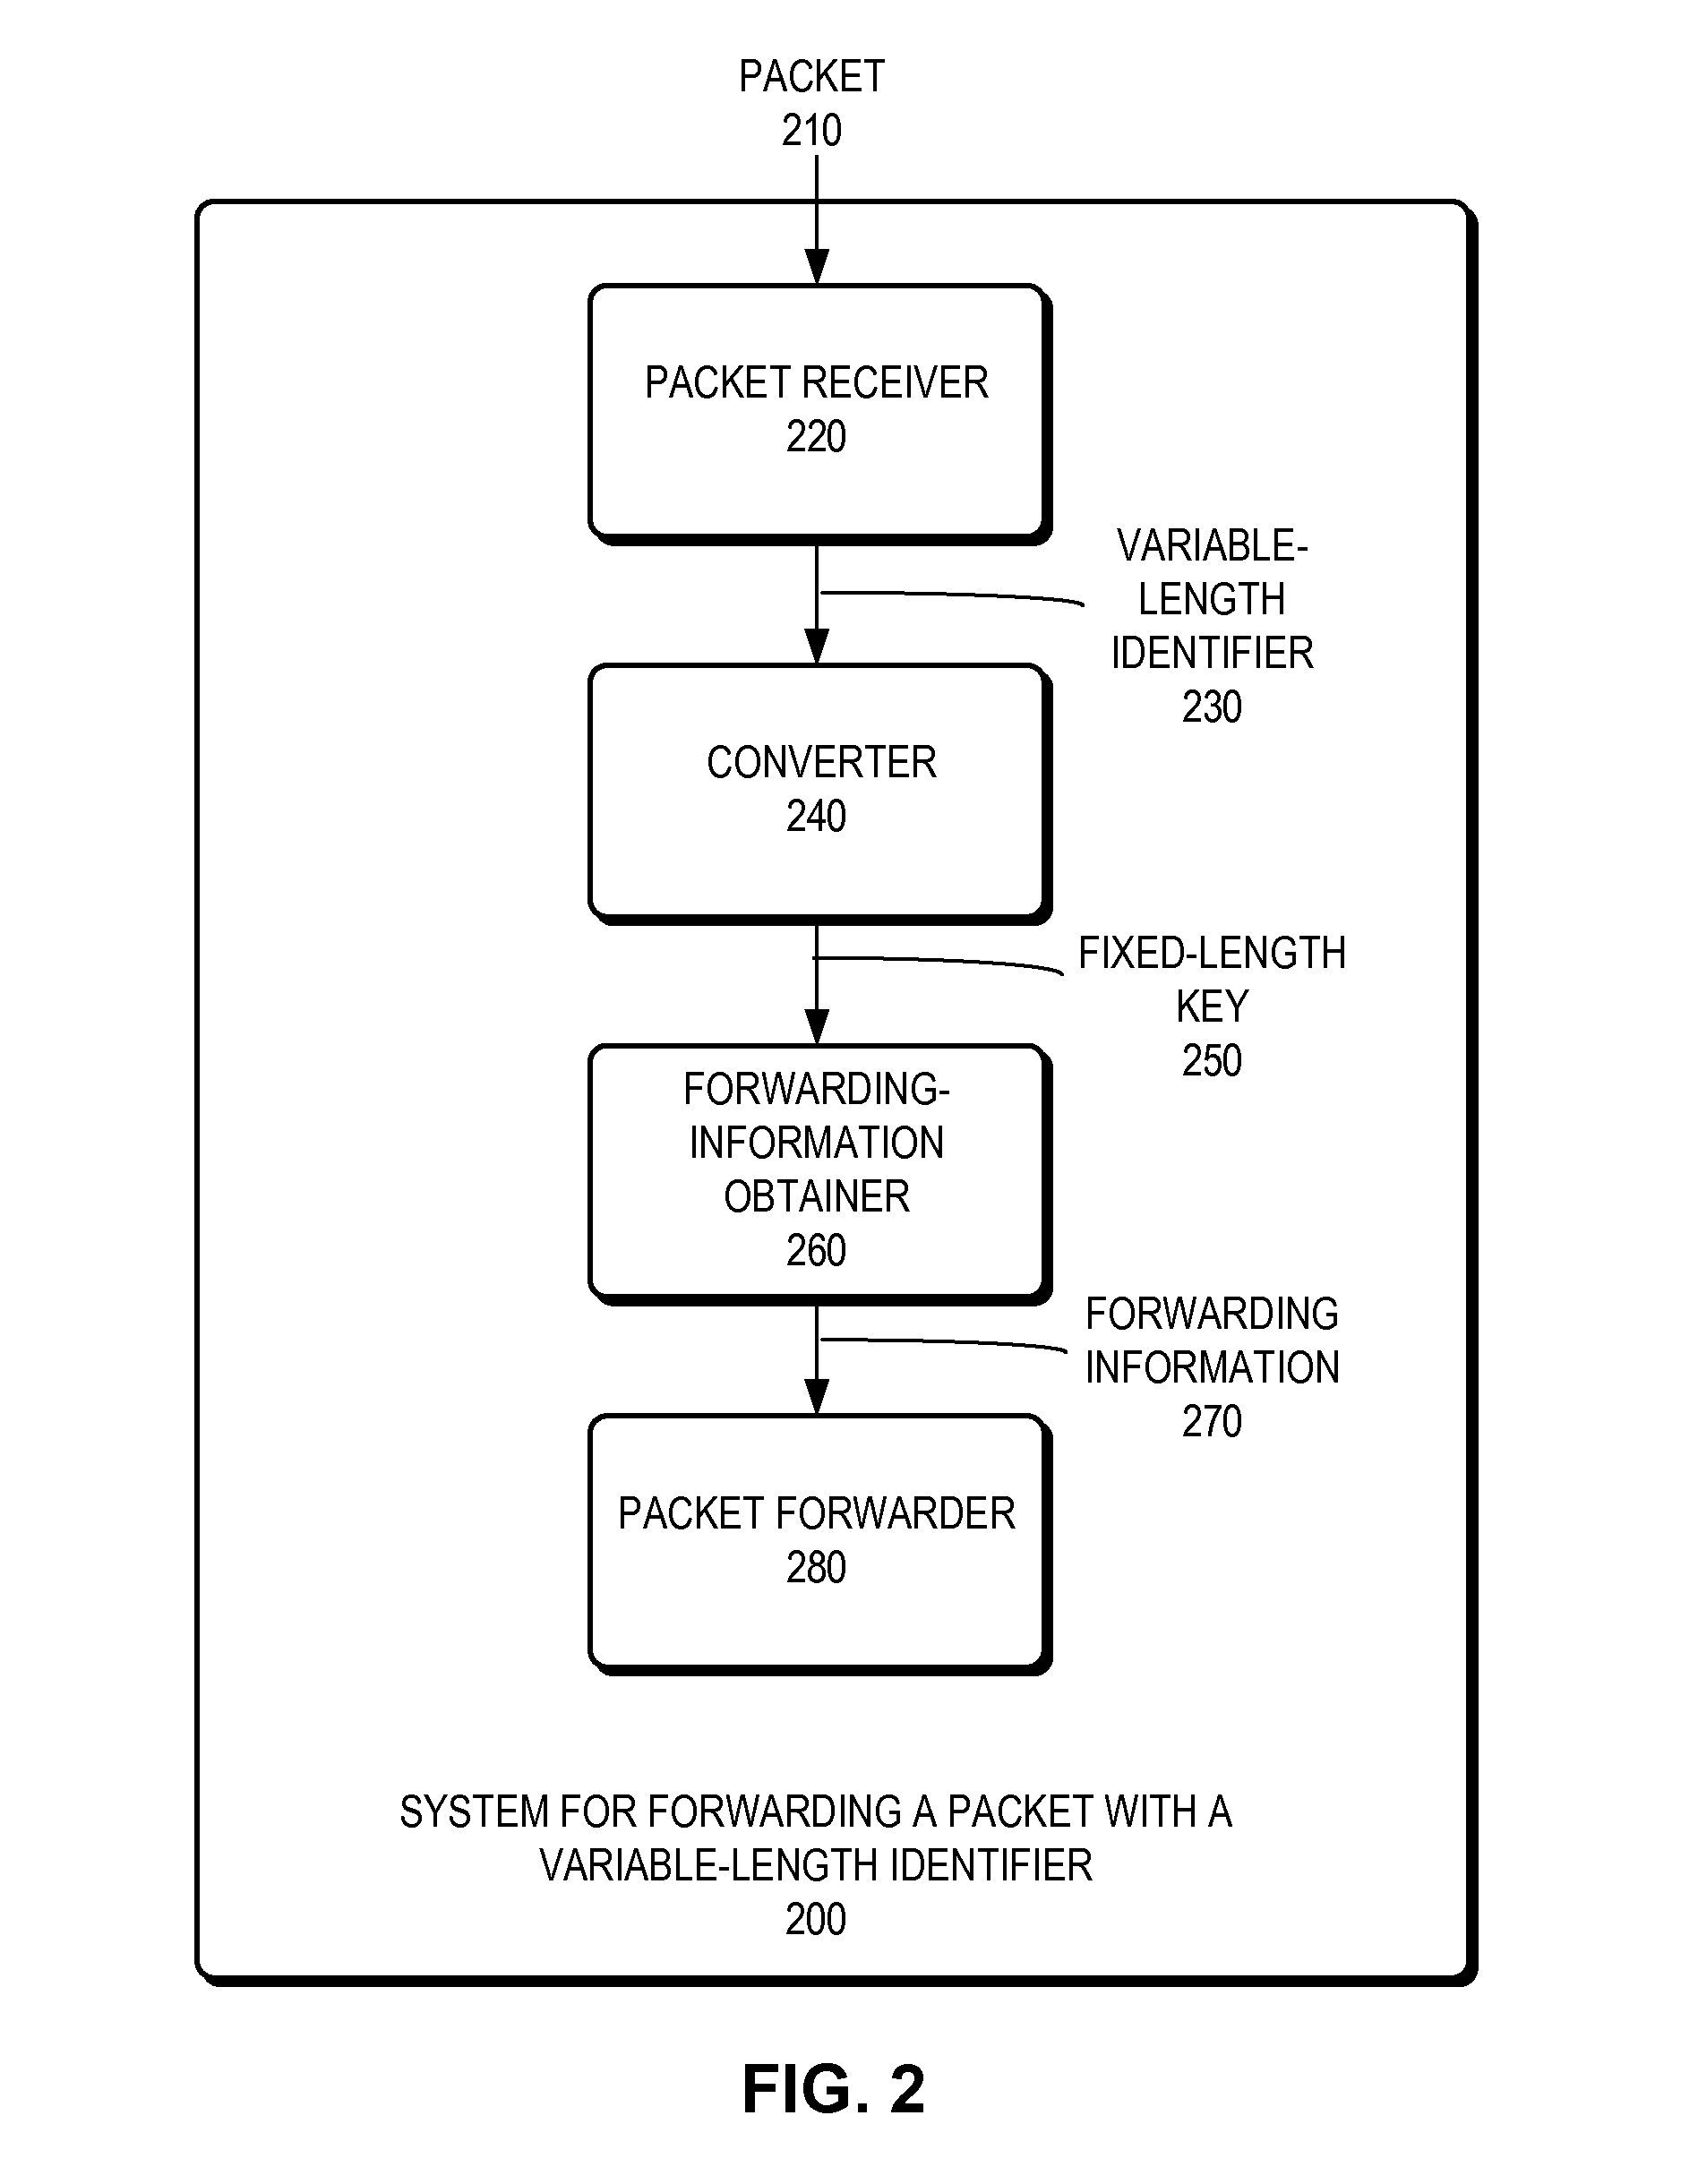 System for forwarding a packet with a hierarchically structured variable-length identifier